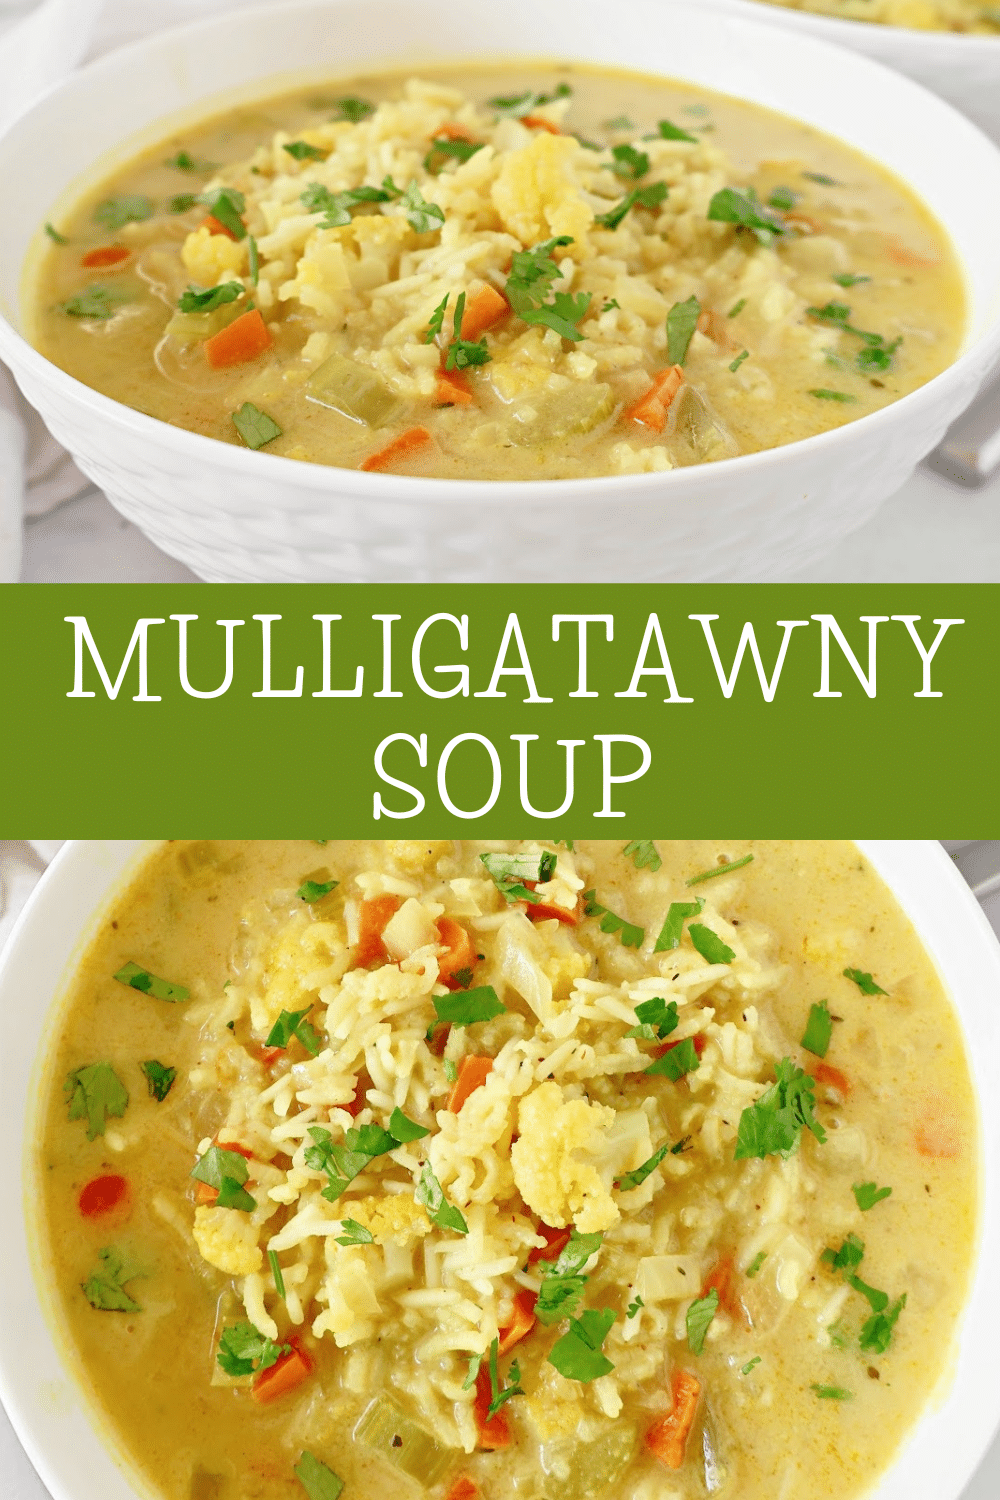 Mulligatawny Soup recipe! Packed with fresh veggies, fragrant rice, and aromatic Indian spices, this hearty dish is quick and easy to make. Serve with naan bread for a complete meal in just 30 minutes. Vegetarian and Vegan.  via @thiswifecooks